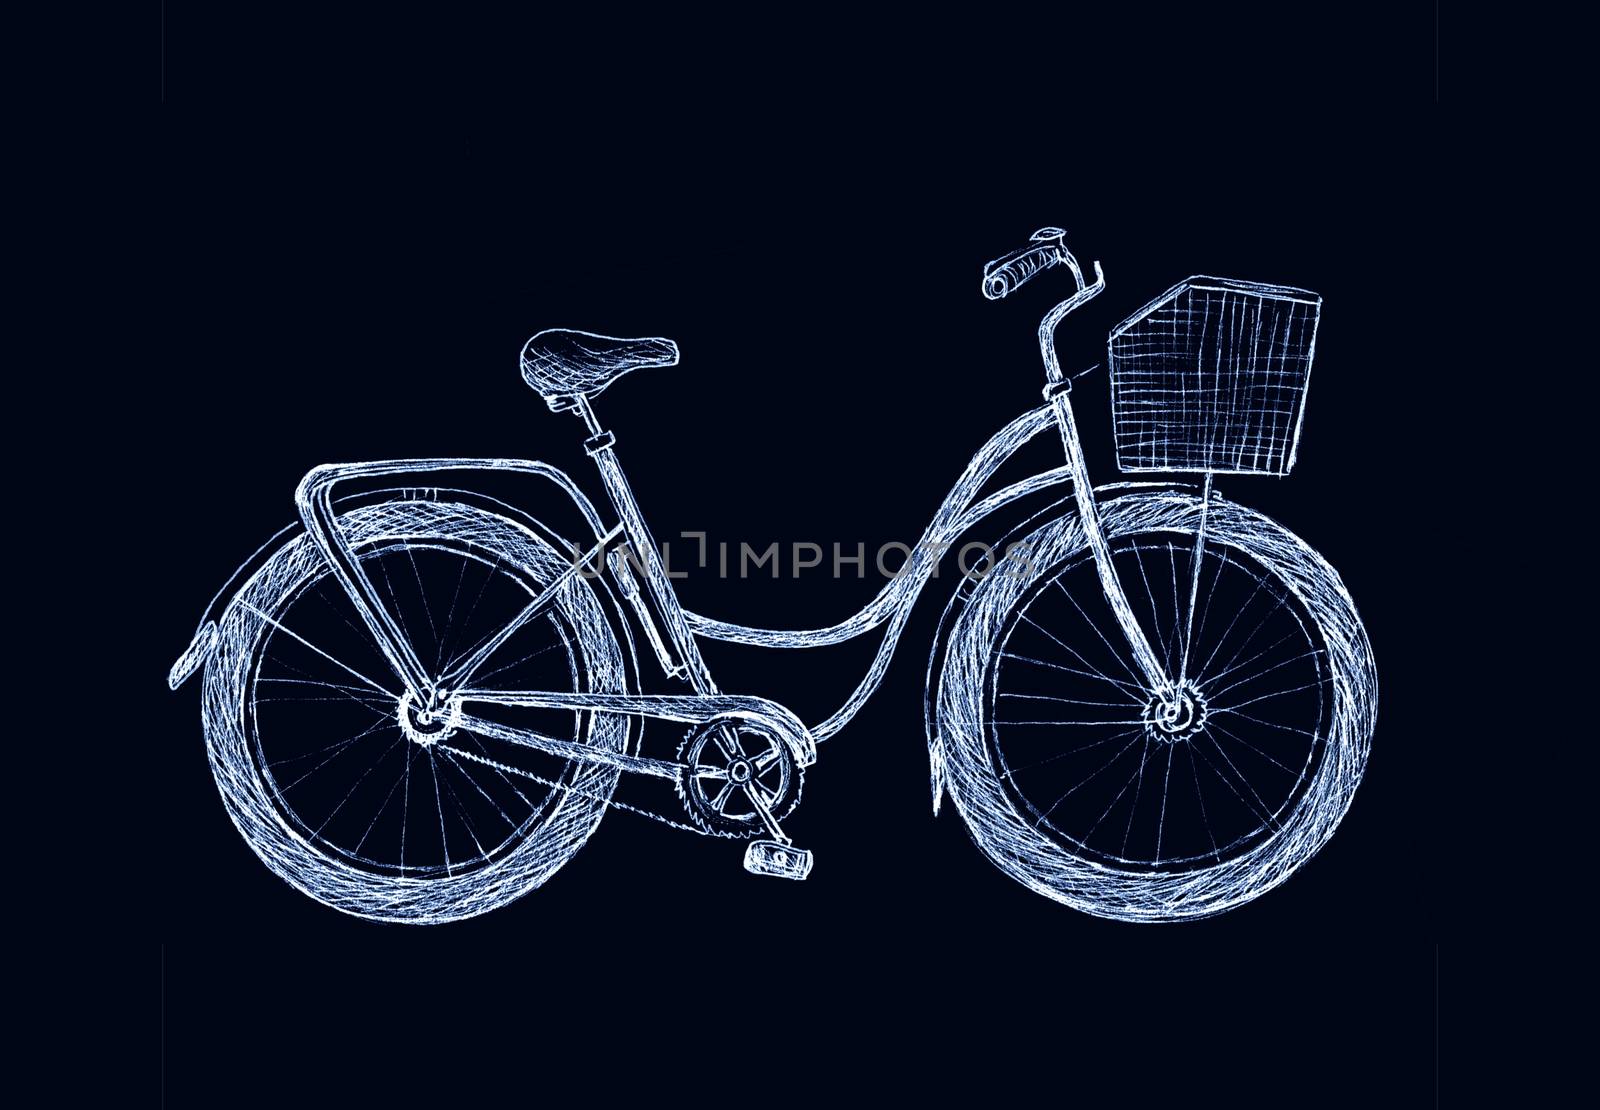 Vintage road bicycle hand drawn illustration. Eco transport sketch isolated on black background by sshisshka